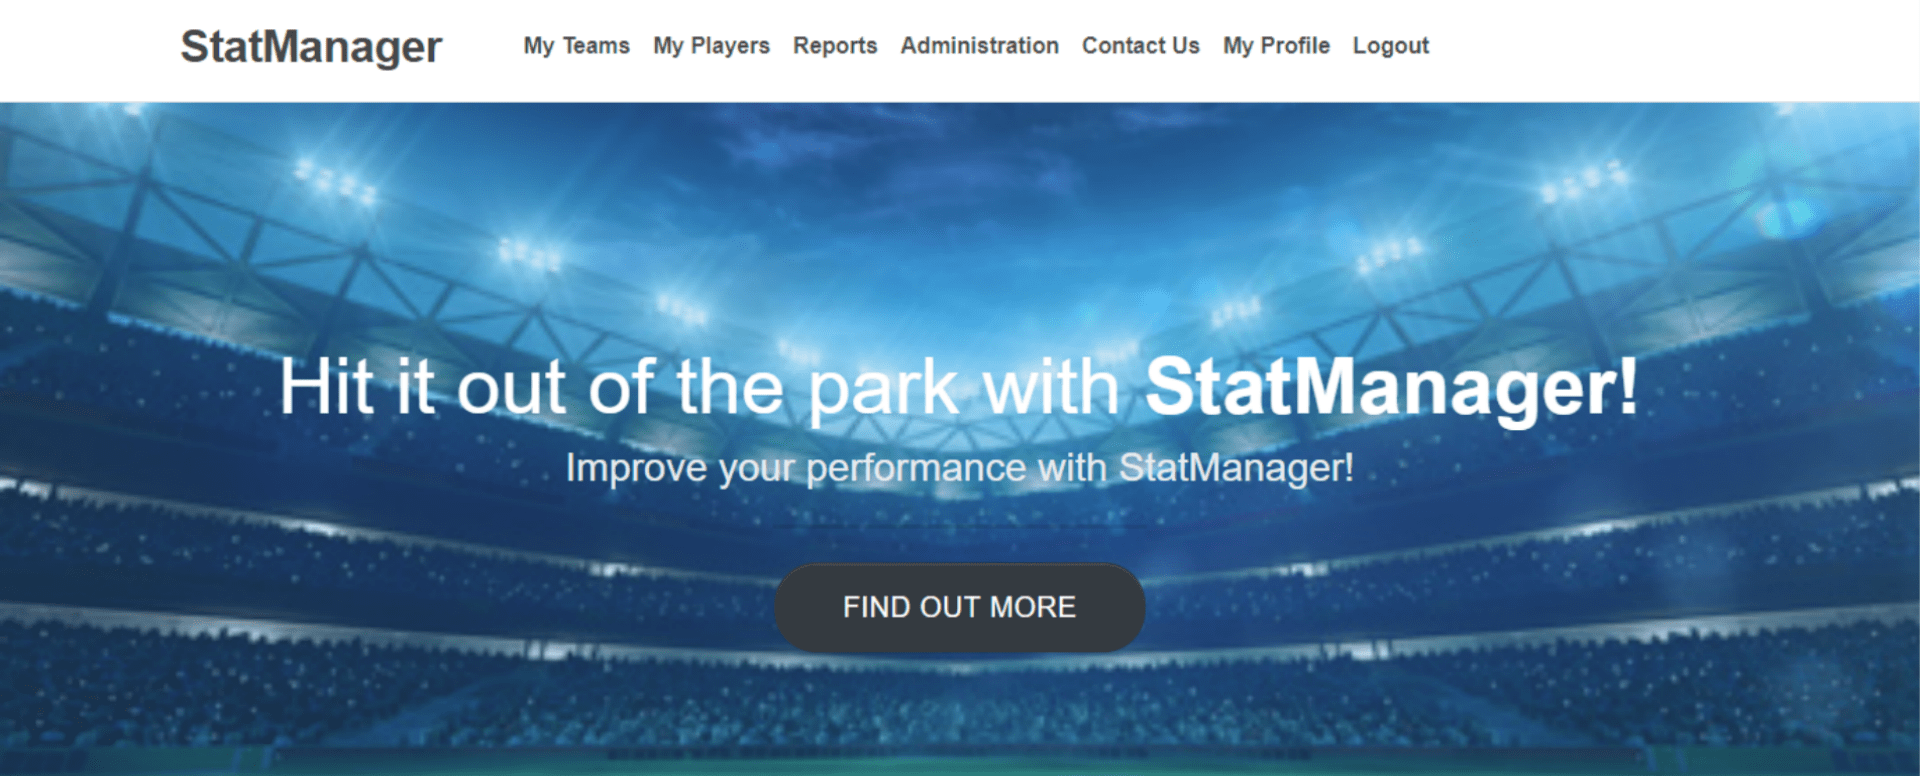 StatManager Home